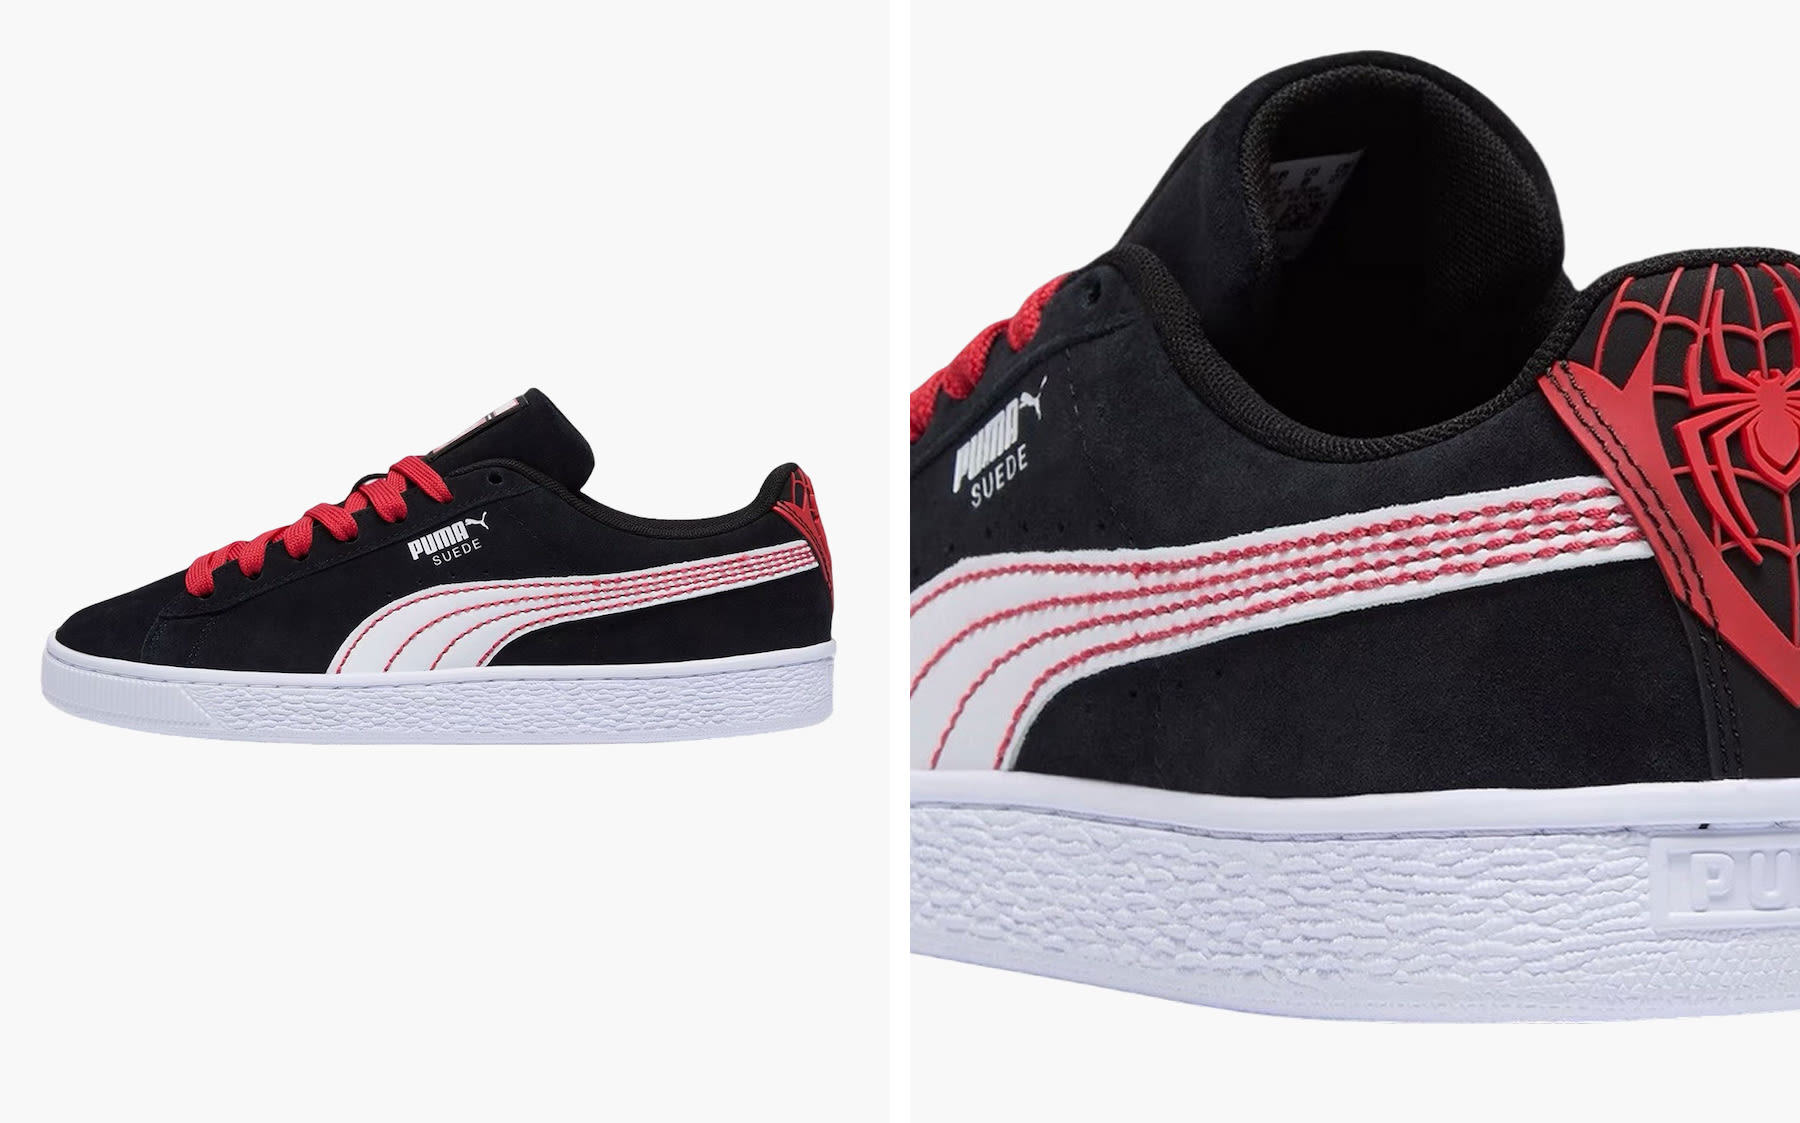 Miles Morales of ‘Spider-Man’ Is Getting a Puma Suede Sneaker in June